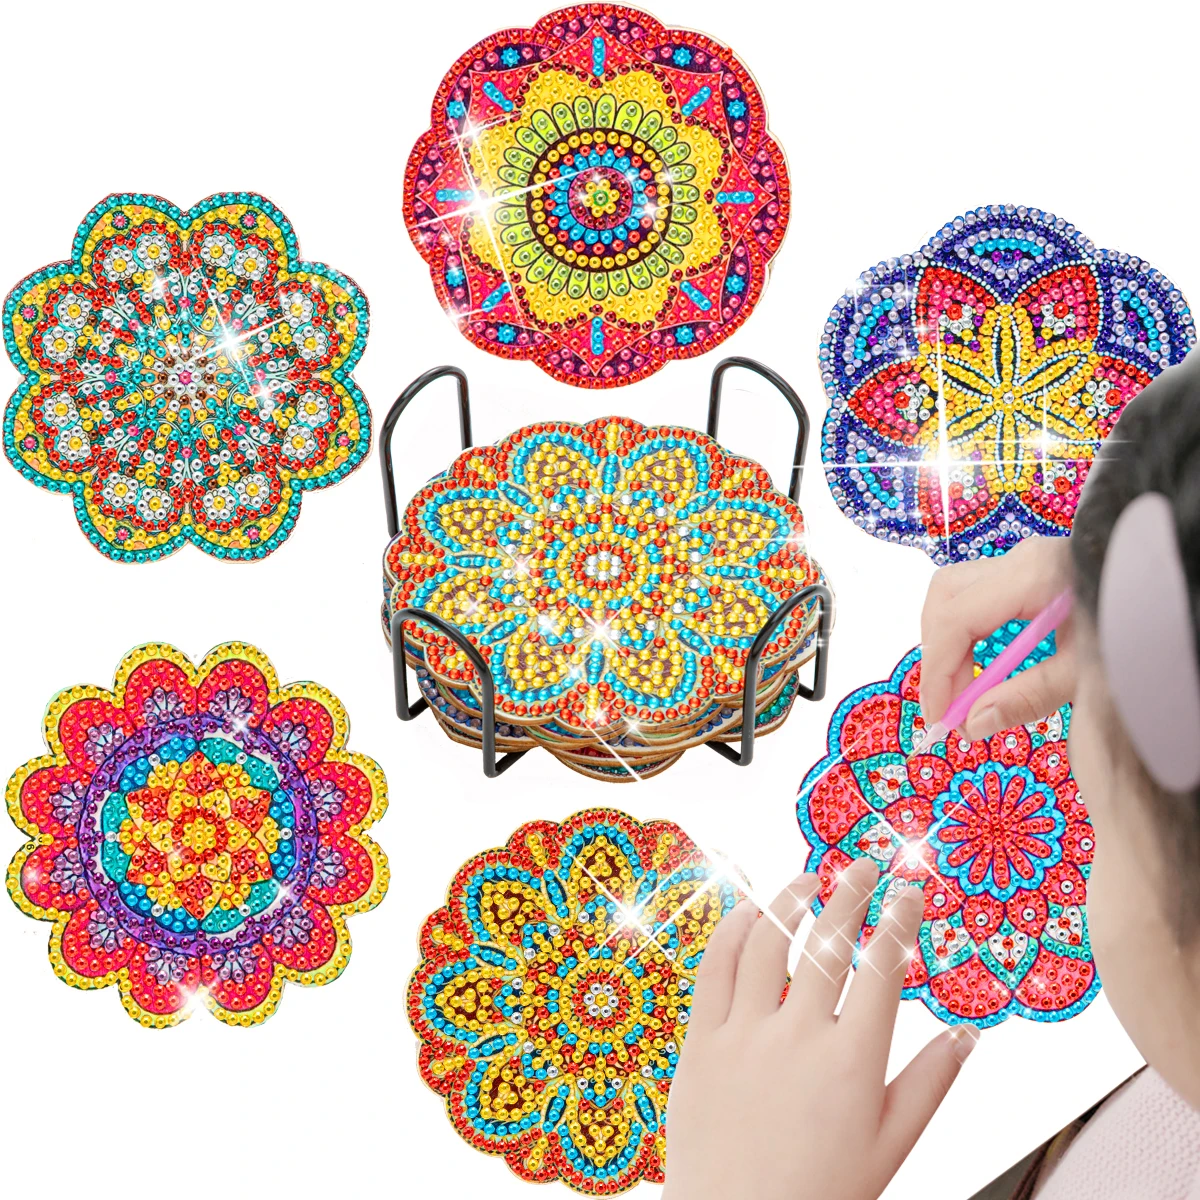 

CHENISTORY 6pc/sets Diamond Painting Coasters Mosaic Art For Adults Kids Beginners With Holder Mandala 10x10cm Gift